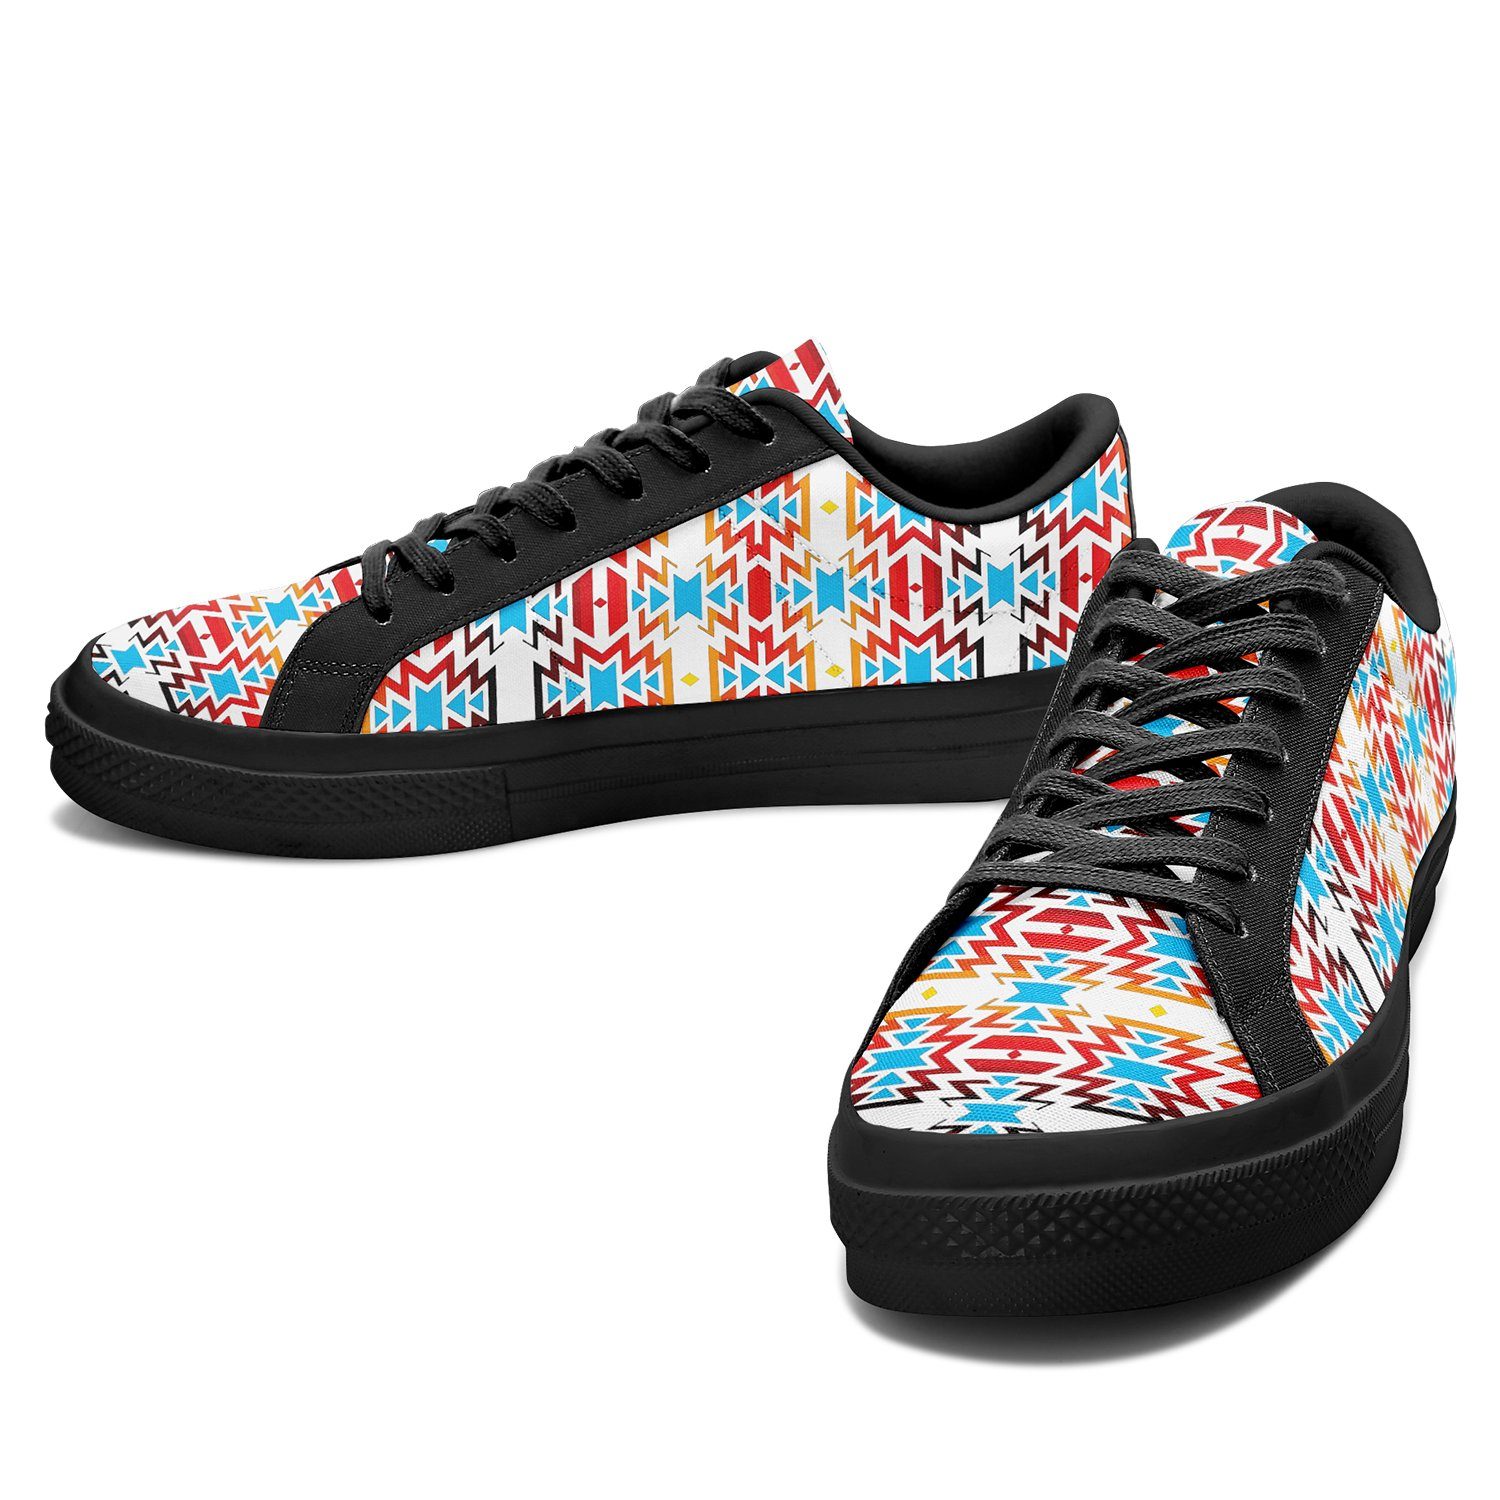 Fire Colors and Sky Aapisi Low Top Canvas Shoes Black Sole 49 Dzine 